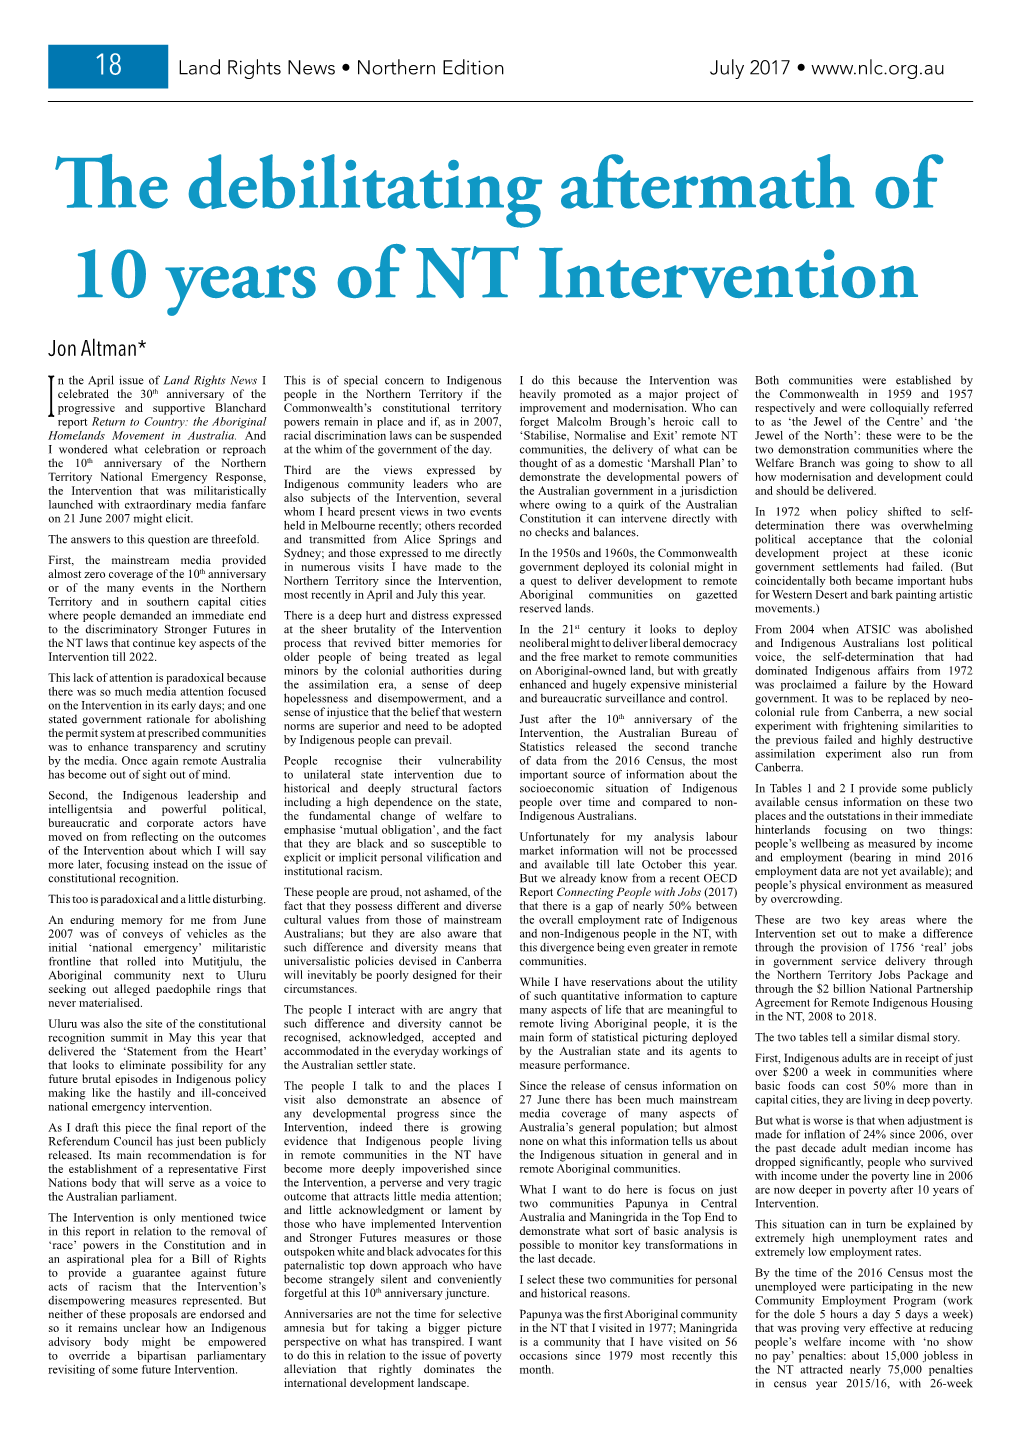 The Debilitating Aftermath of 10 Years of NT Intervention